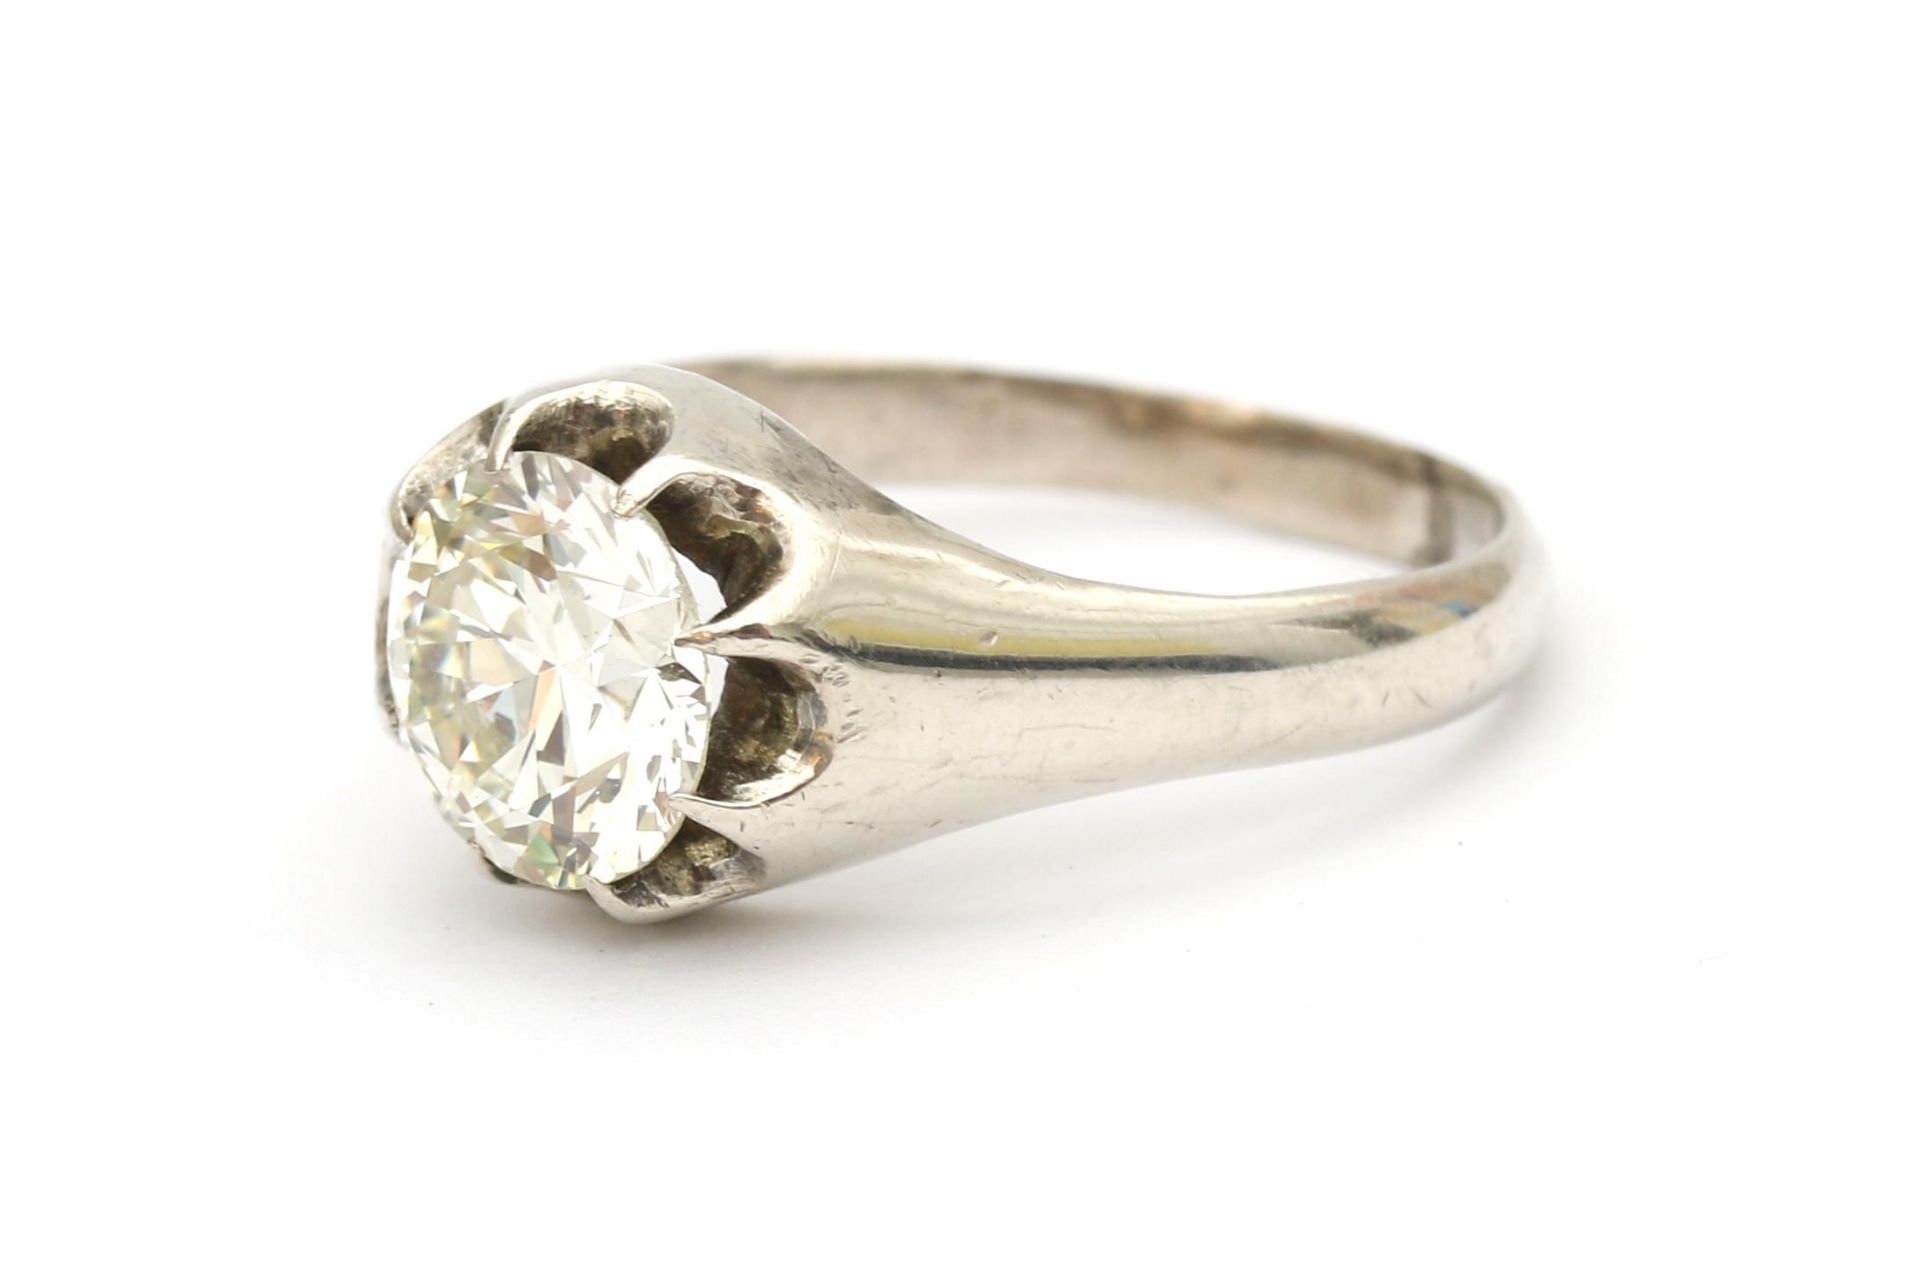 A silver diamond solitaire ring, ca. 1.65 ct. - Image 2 of 2